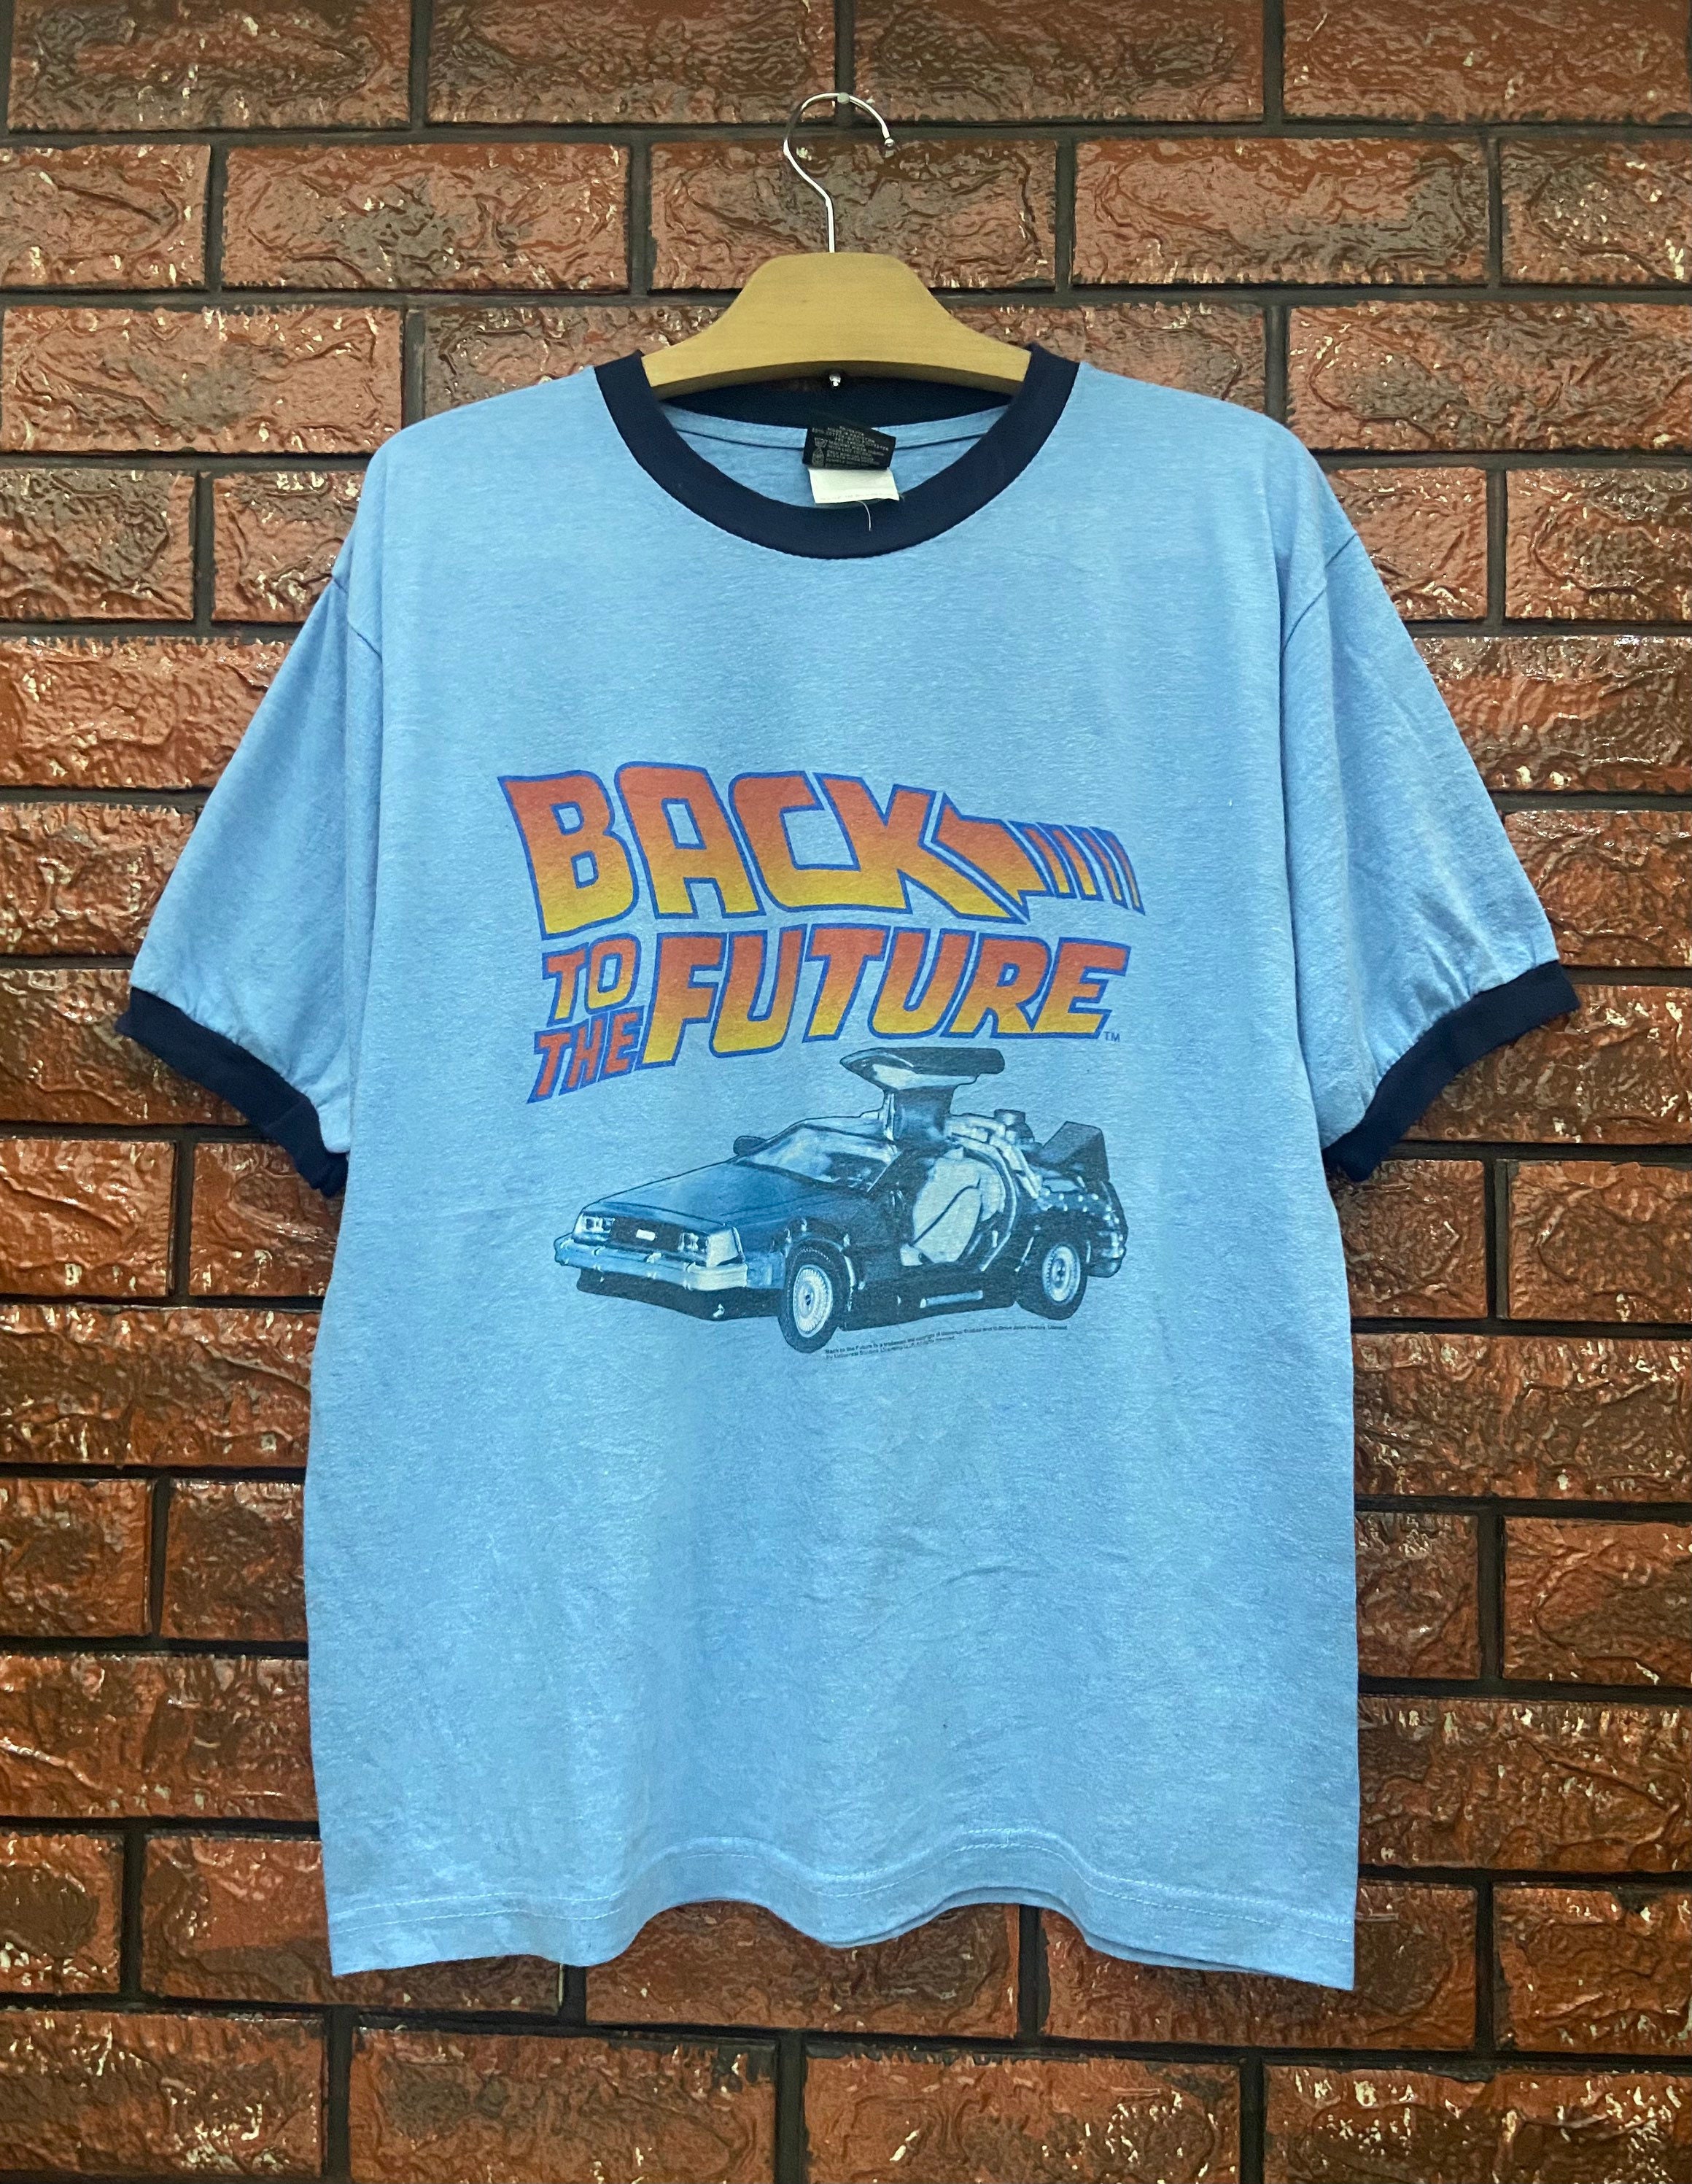 Vintage 90s Back to the Future American Legendary Sci Fi 1985